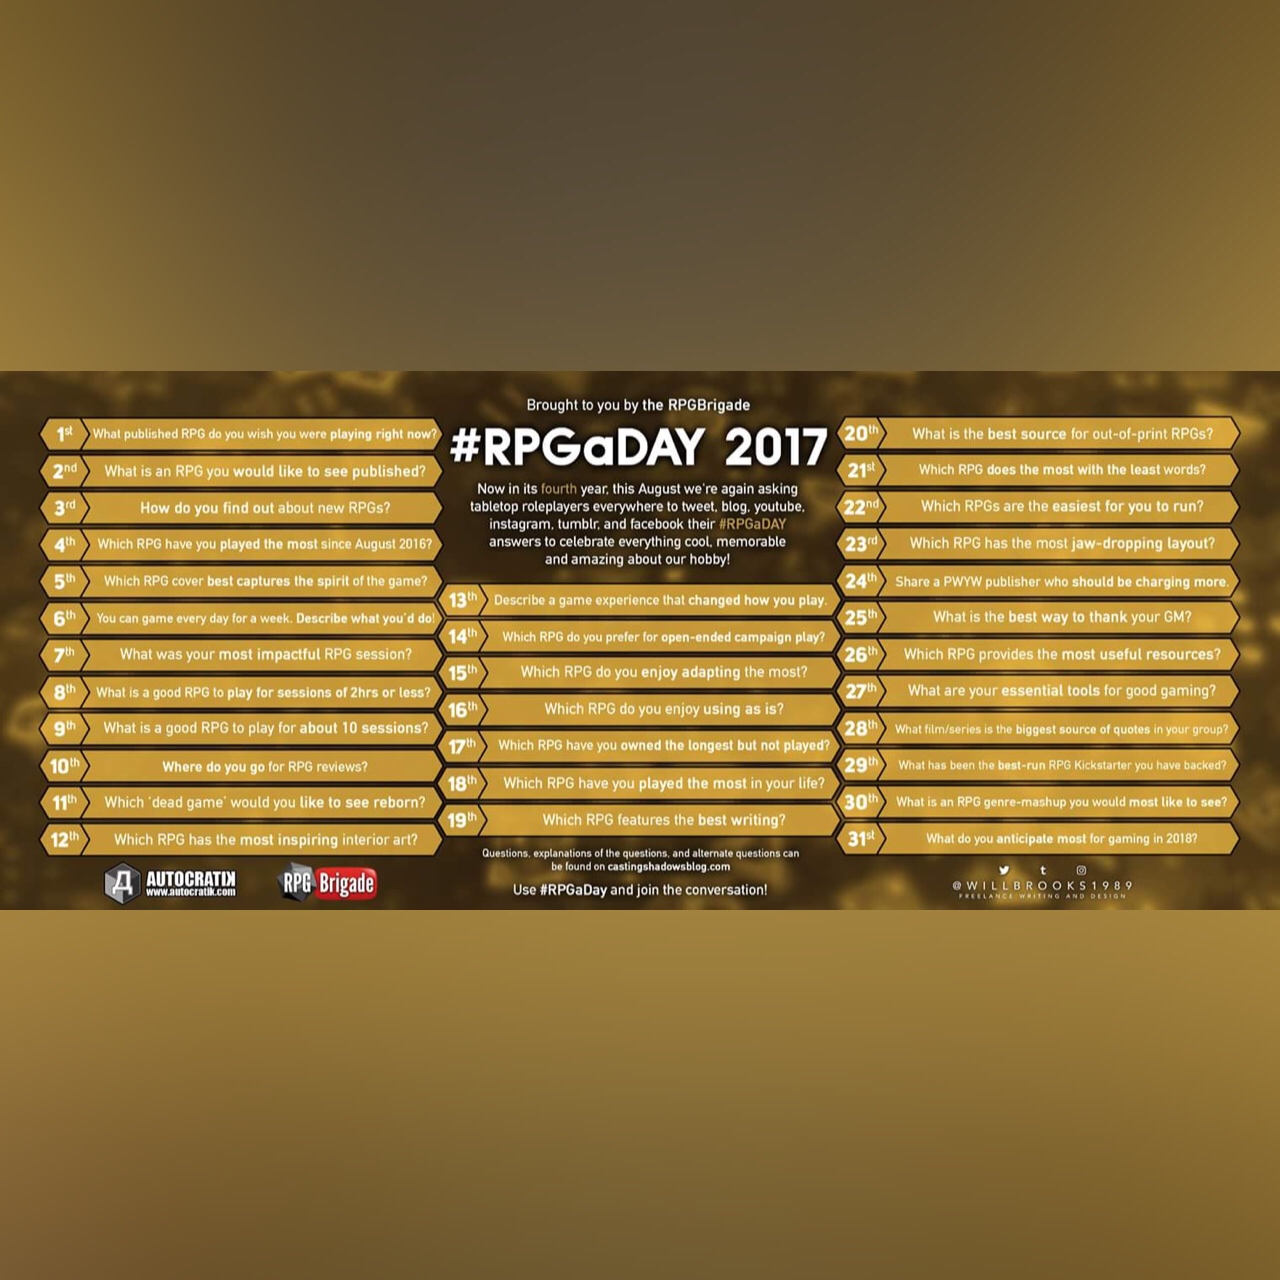 RPGaDAY 2017 August 12th Which RPG has the most inspiring interior art?